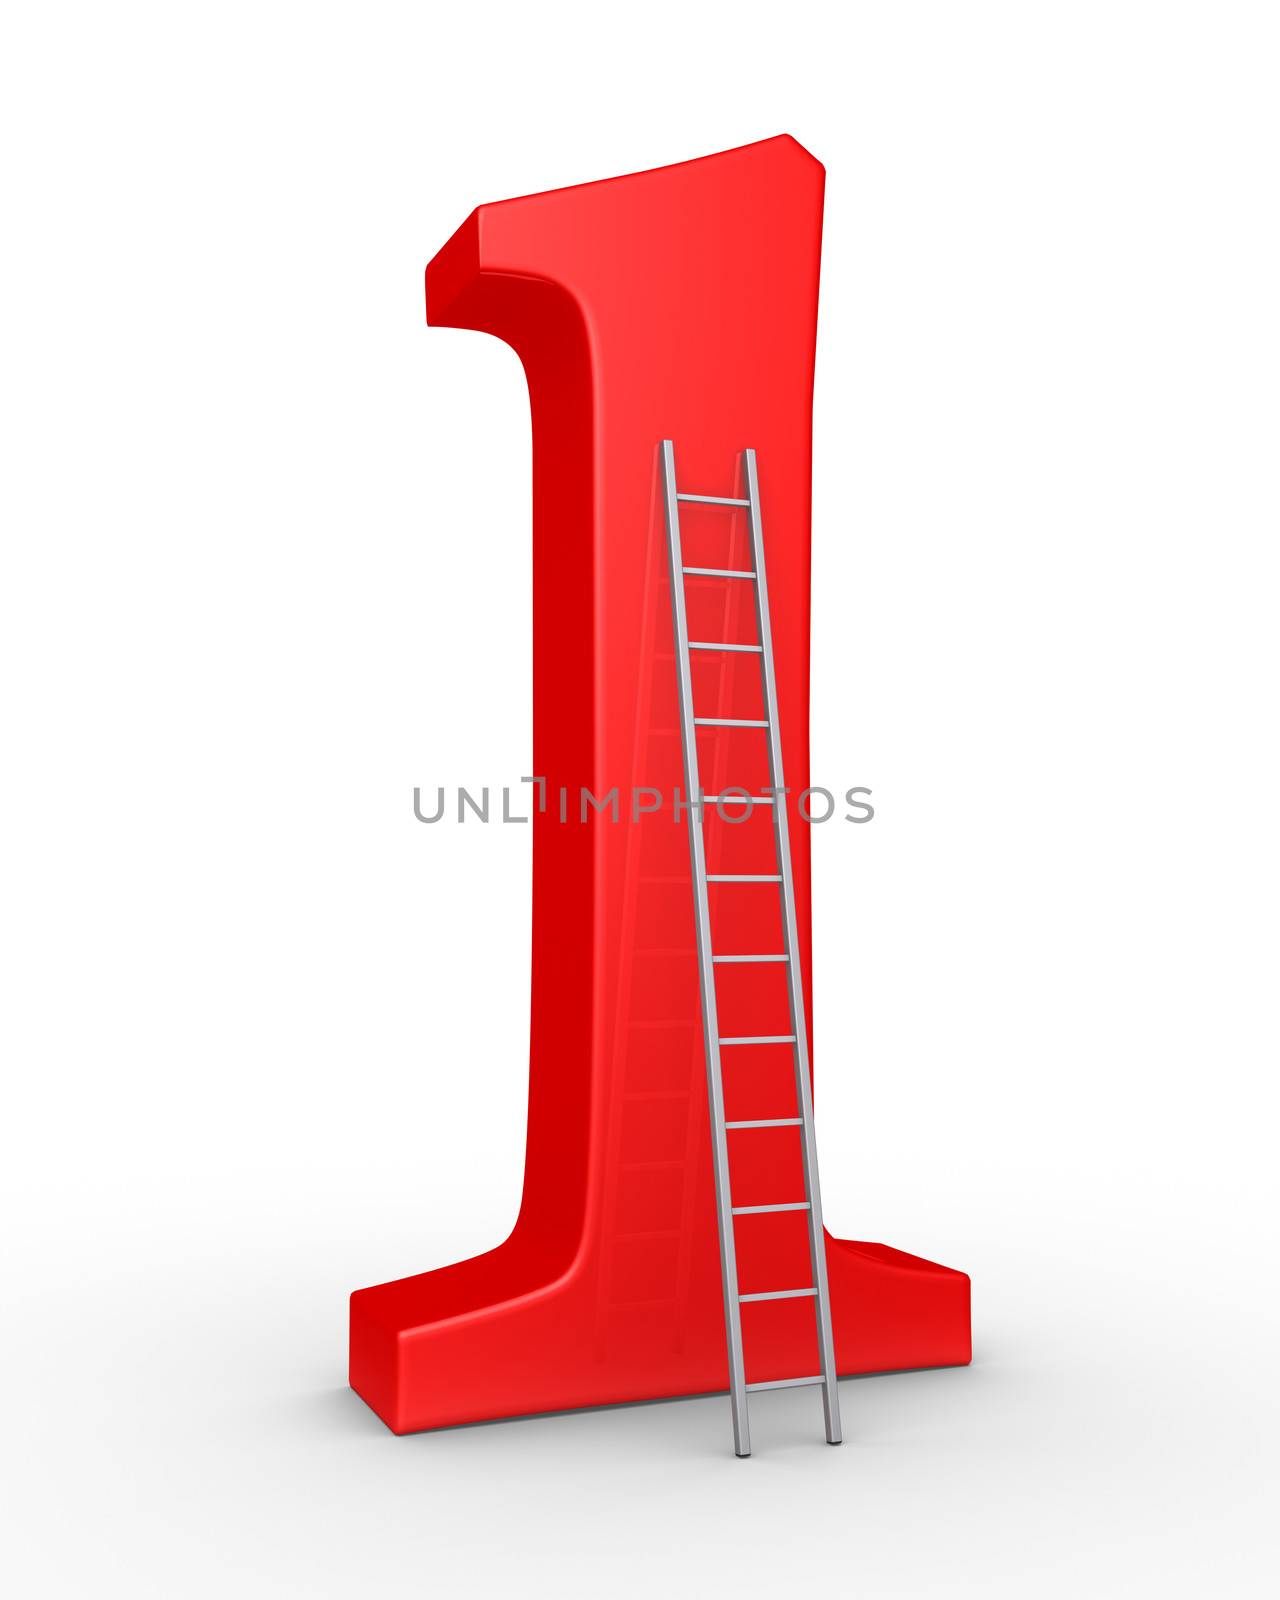 Number one symbol and a ladder by 6kor3dos